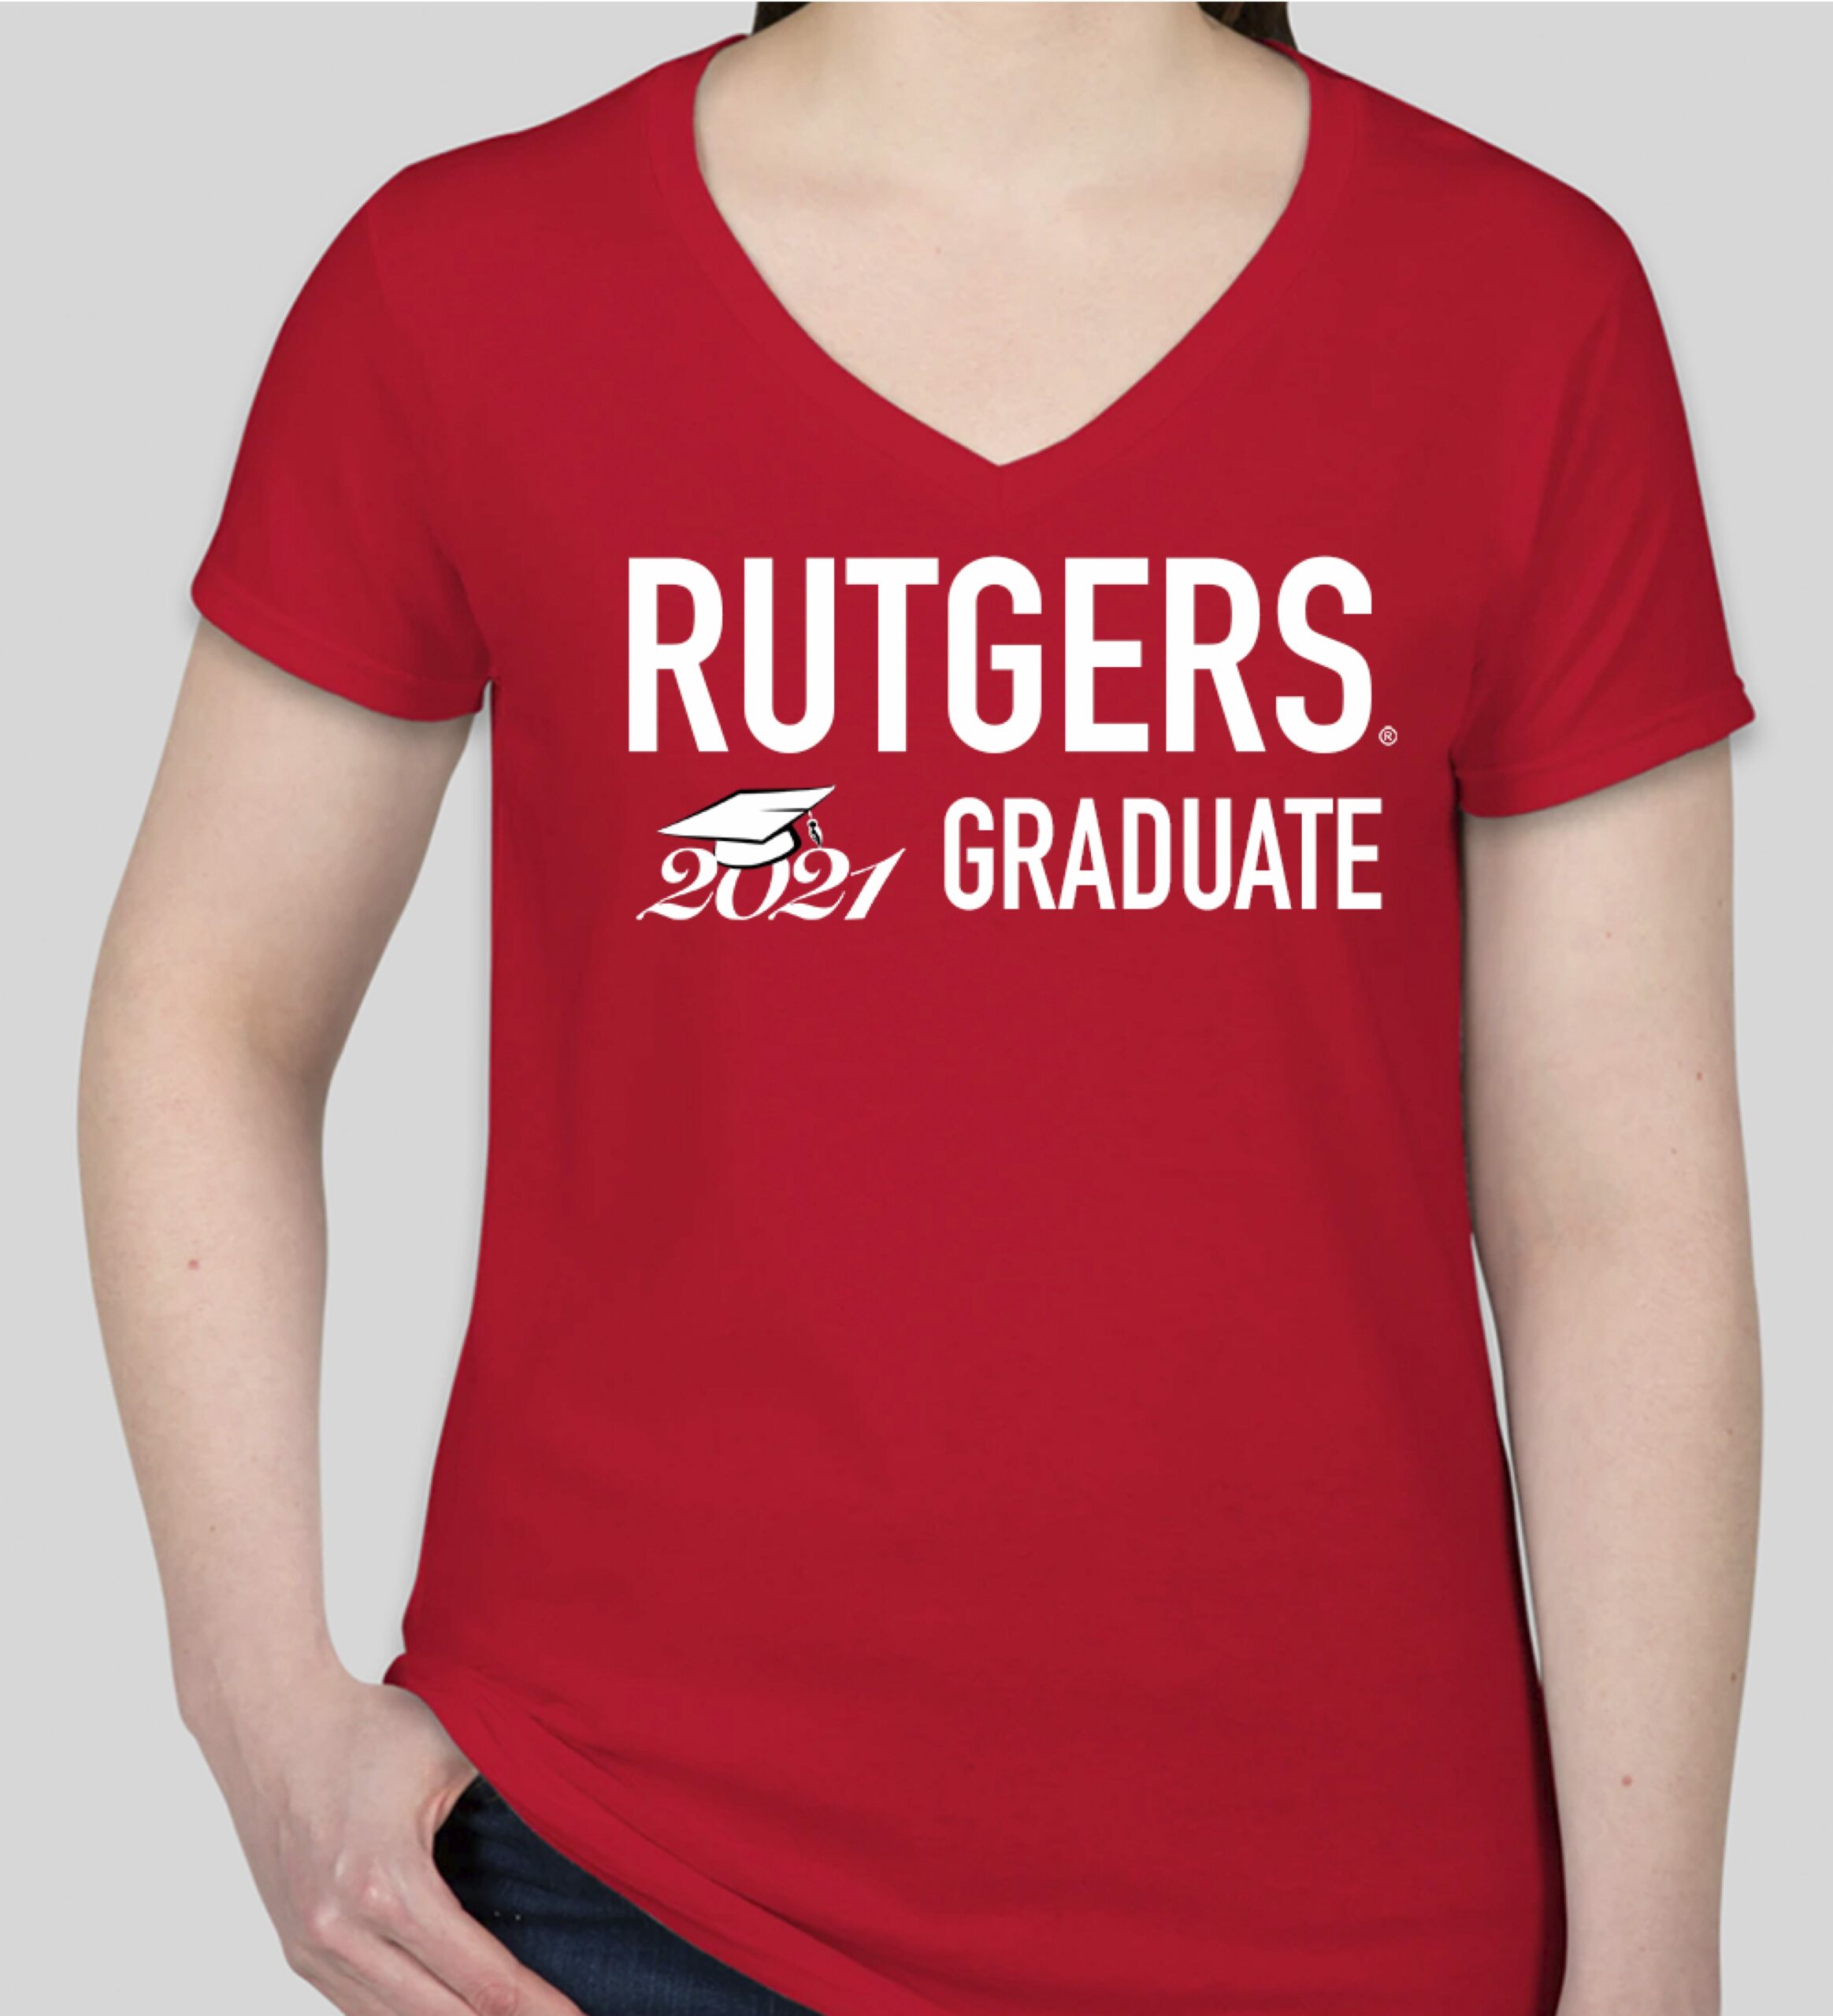 Rutgers New Brunswick Commencement Group